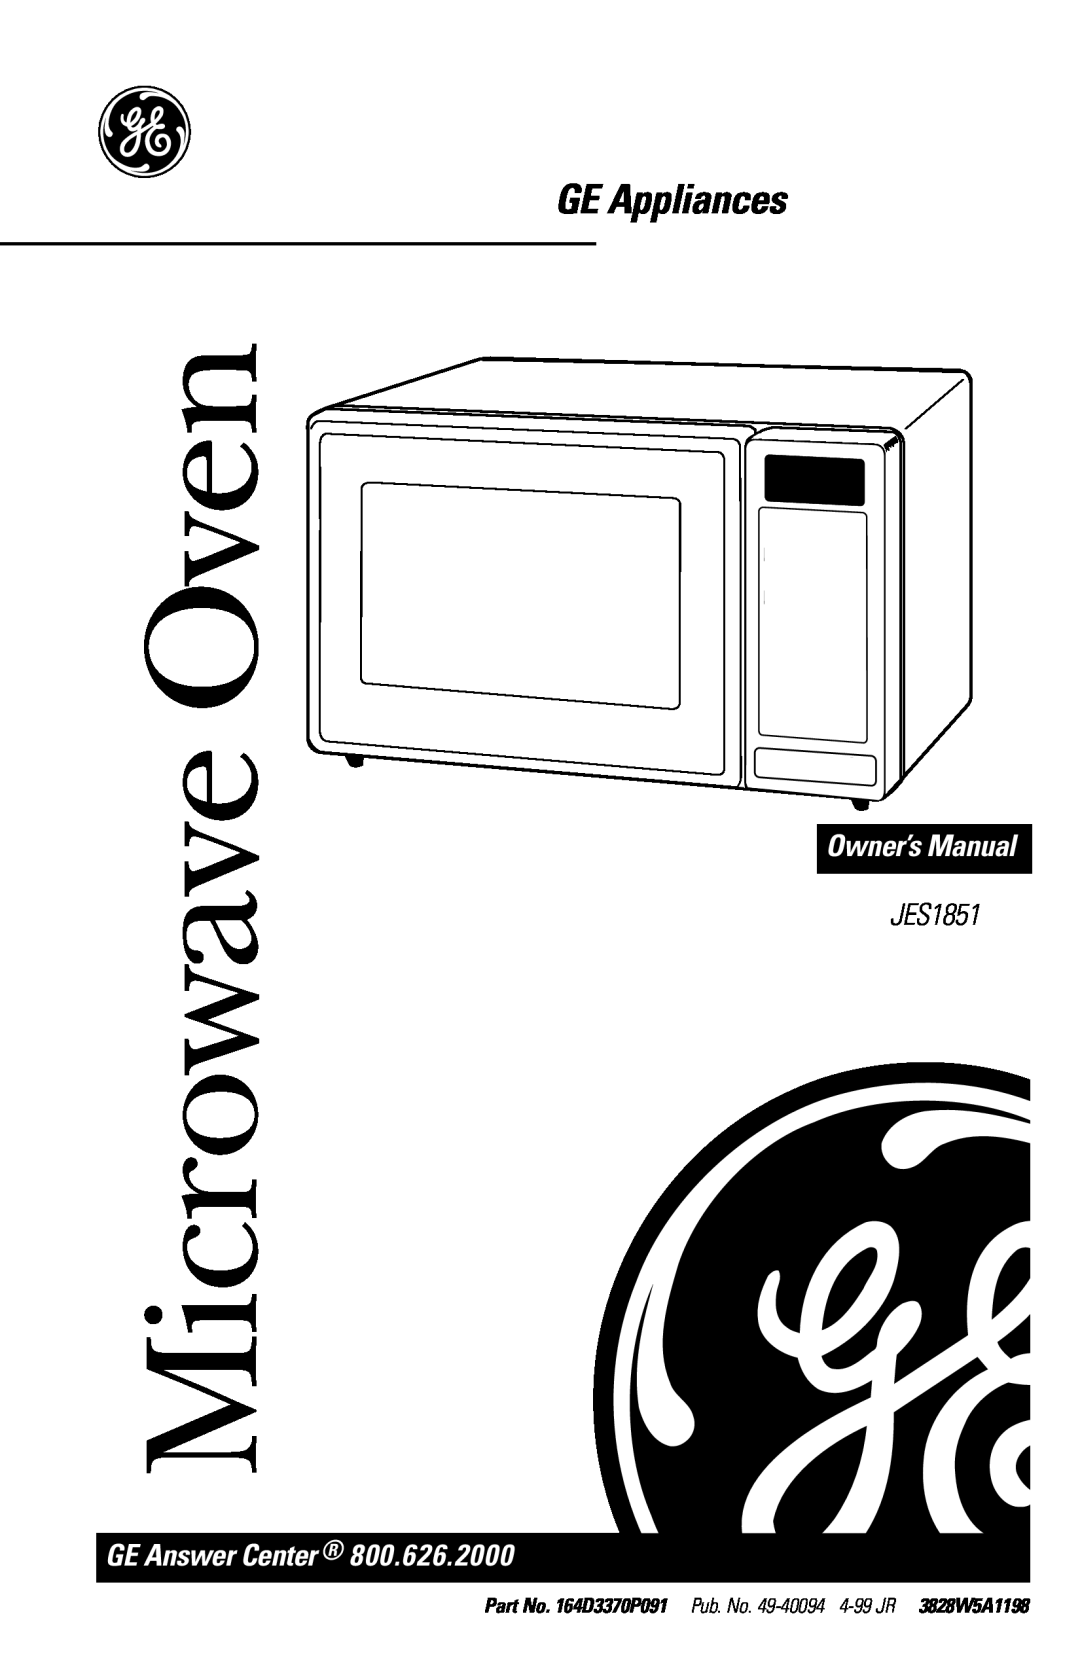 GE JES1851 owner manual GE Appliances, Microwave Oven, GE Answer Center 